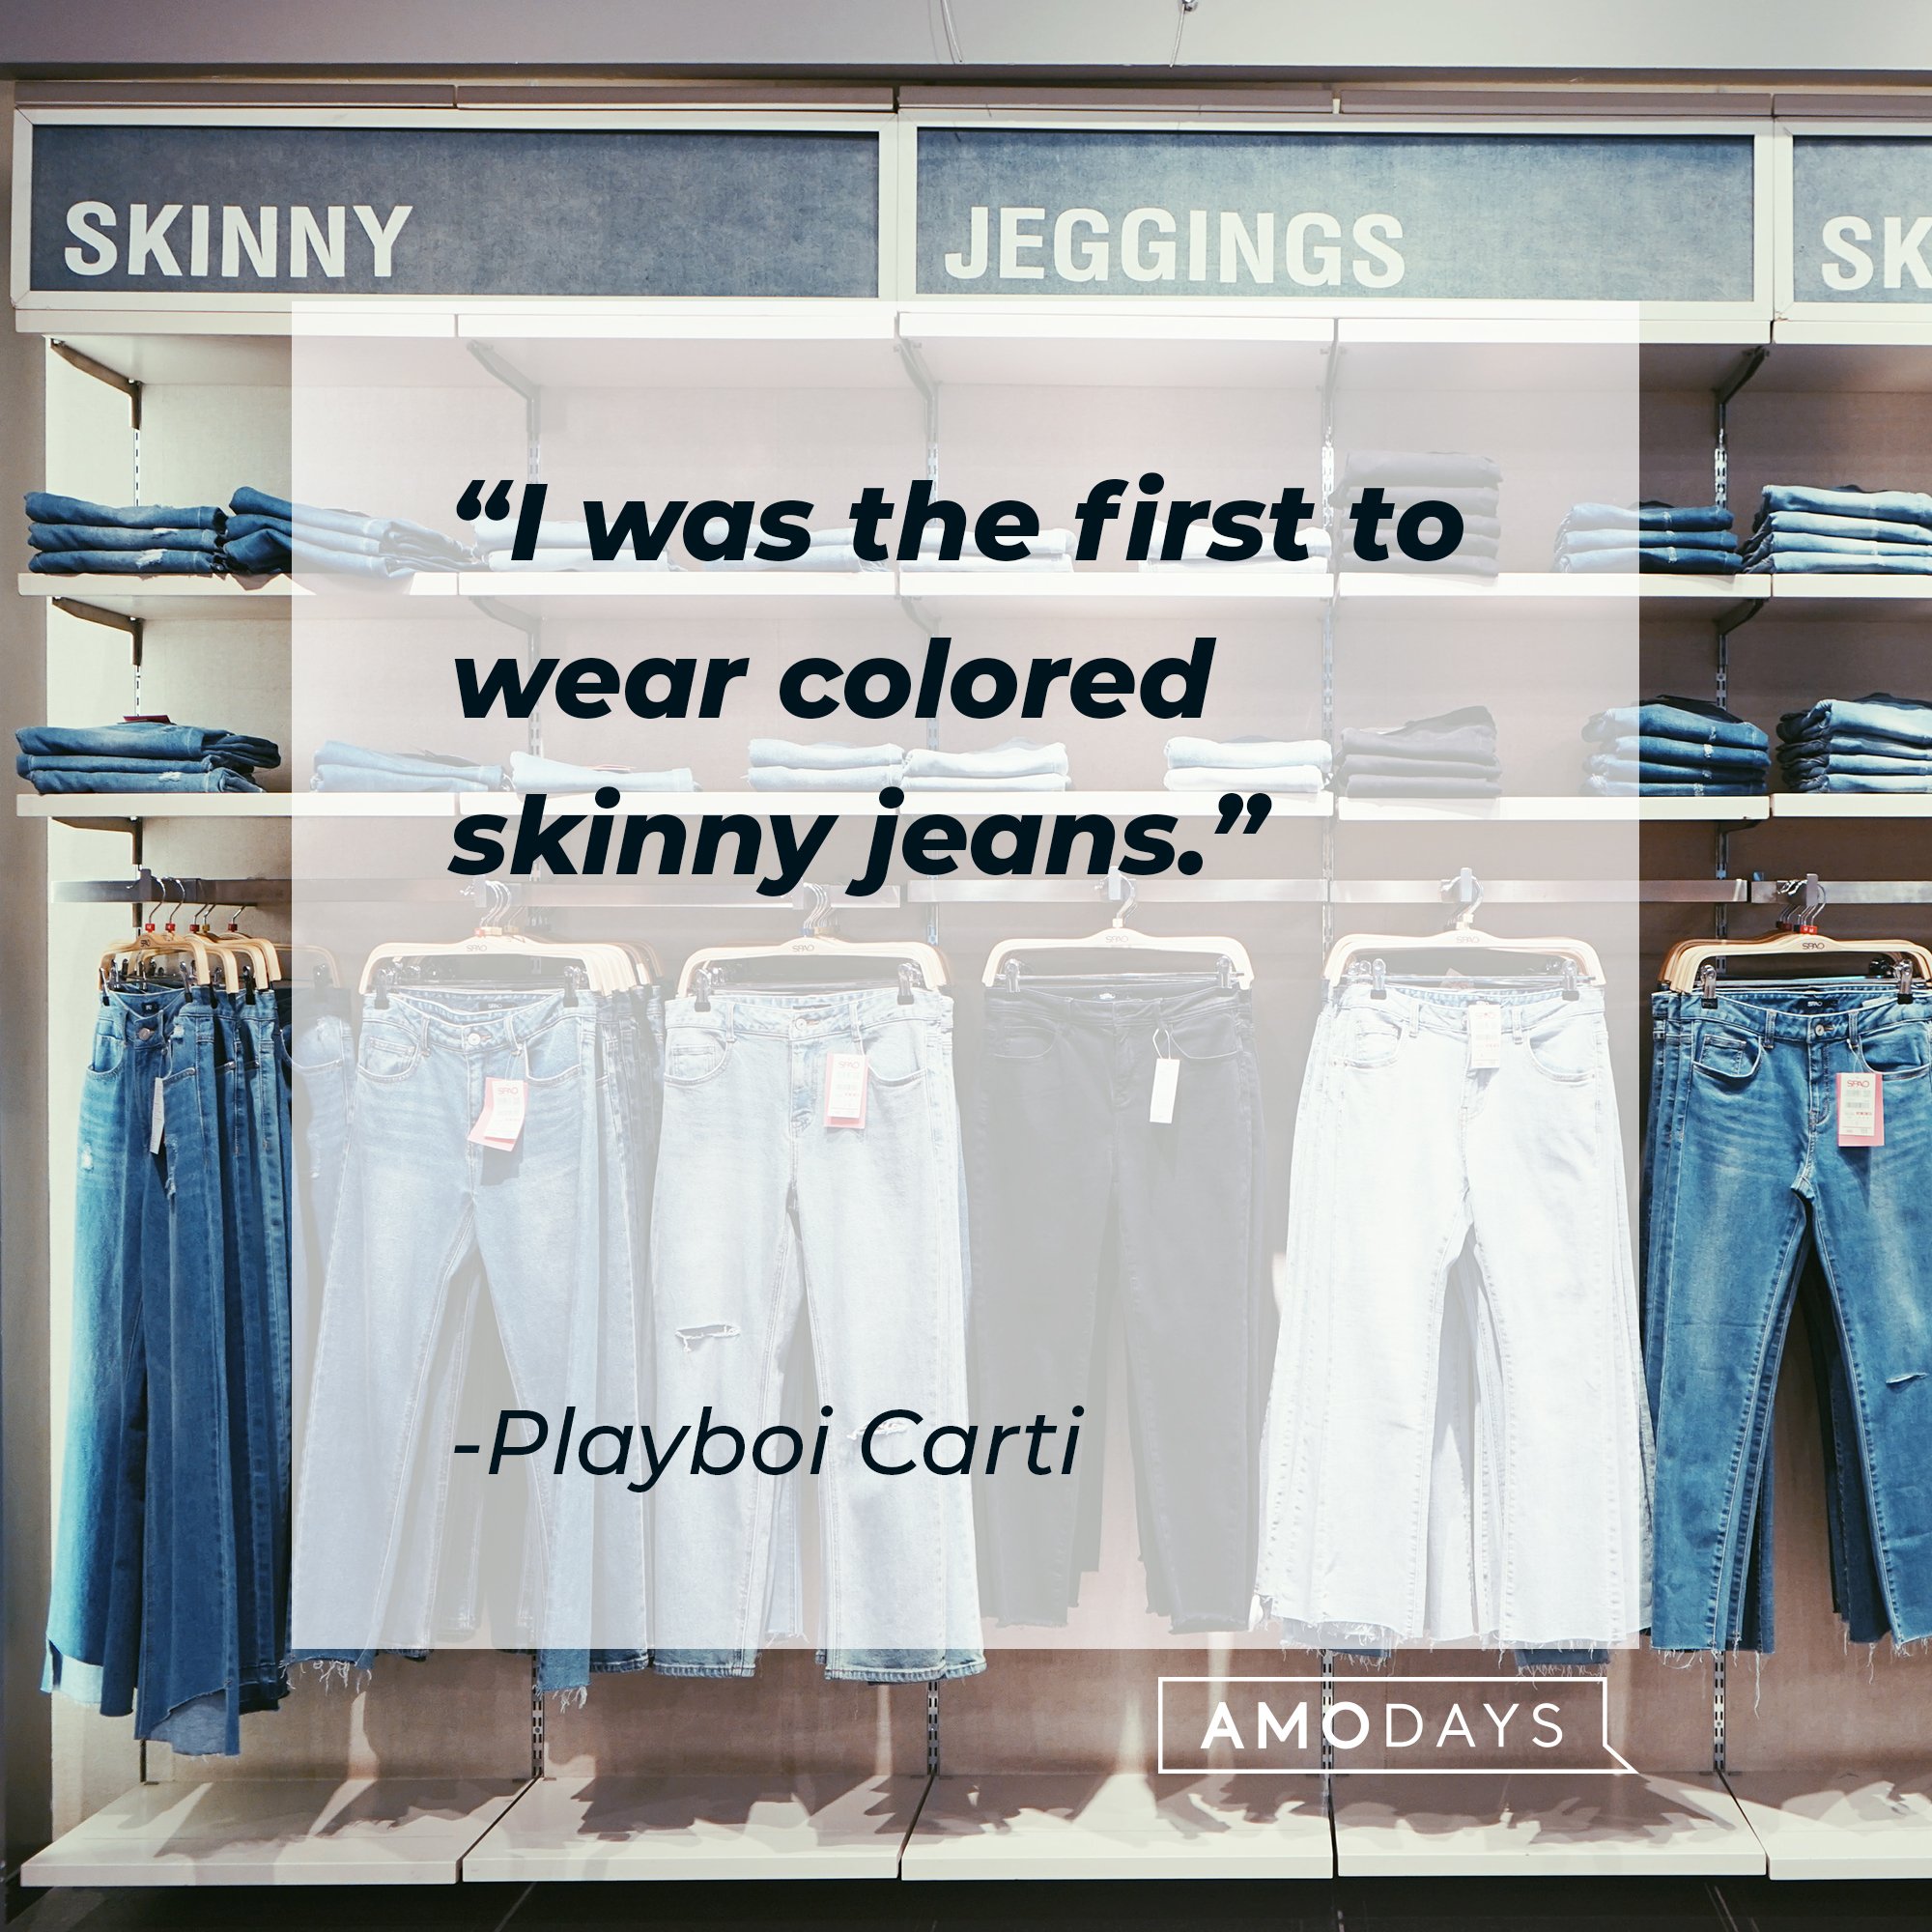 Playboi Carti‘s quote: "I was the first to wear colored skinny jeans." | Image: AmoDays